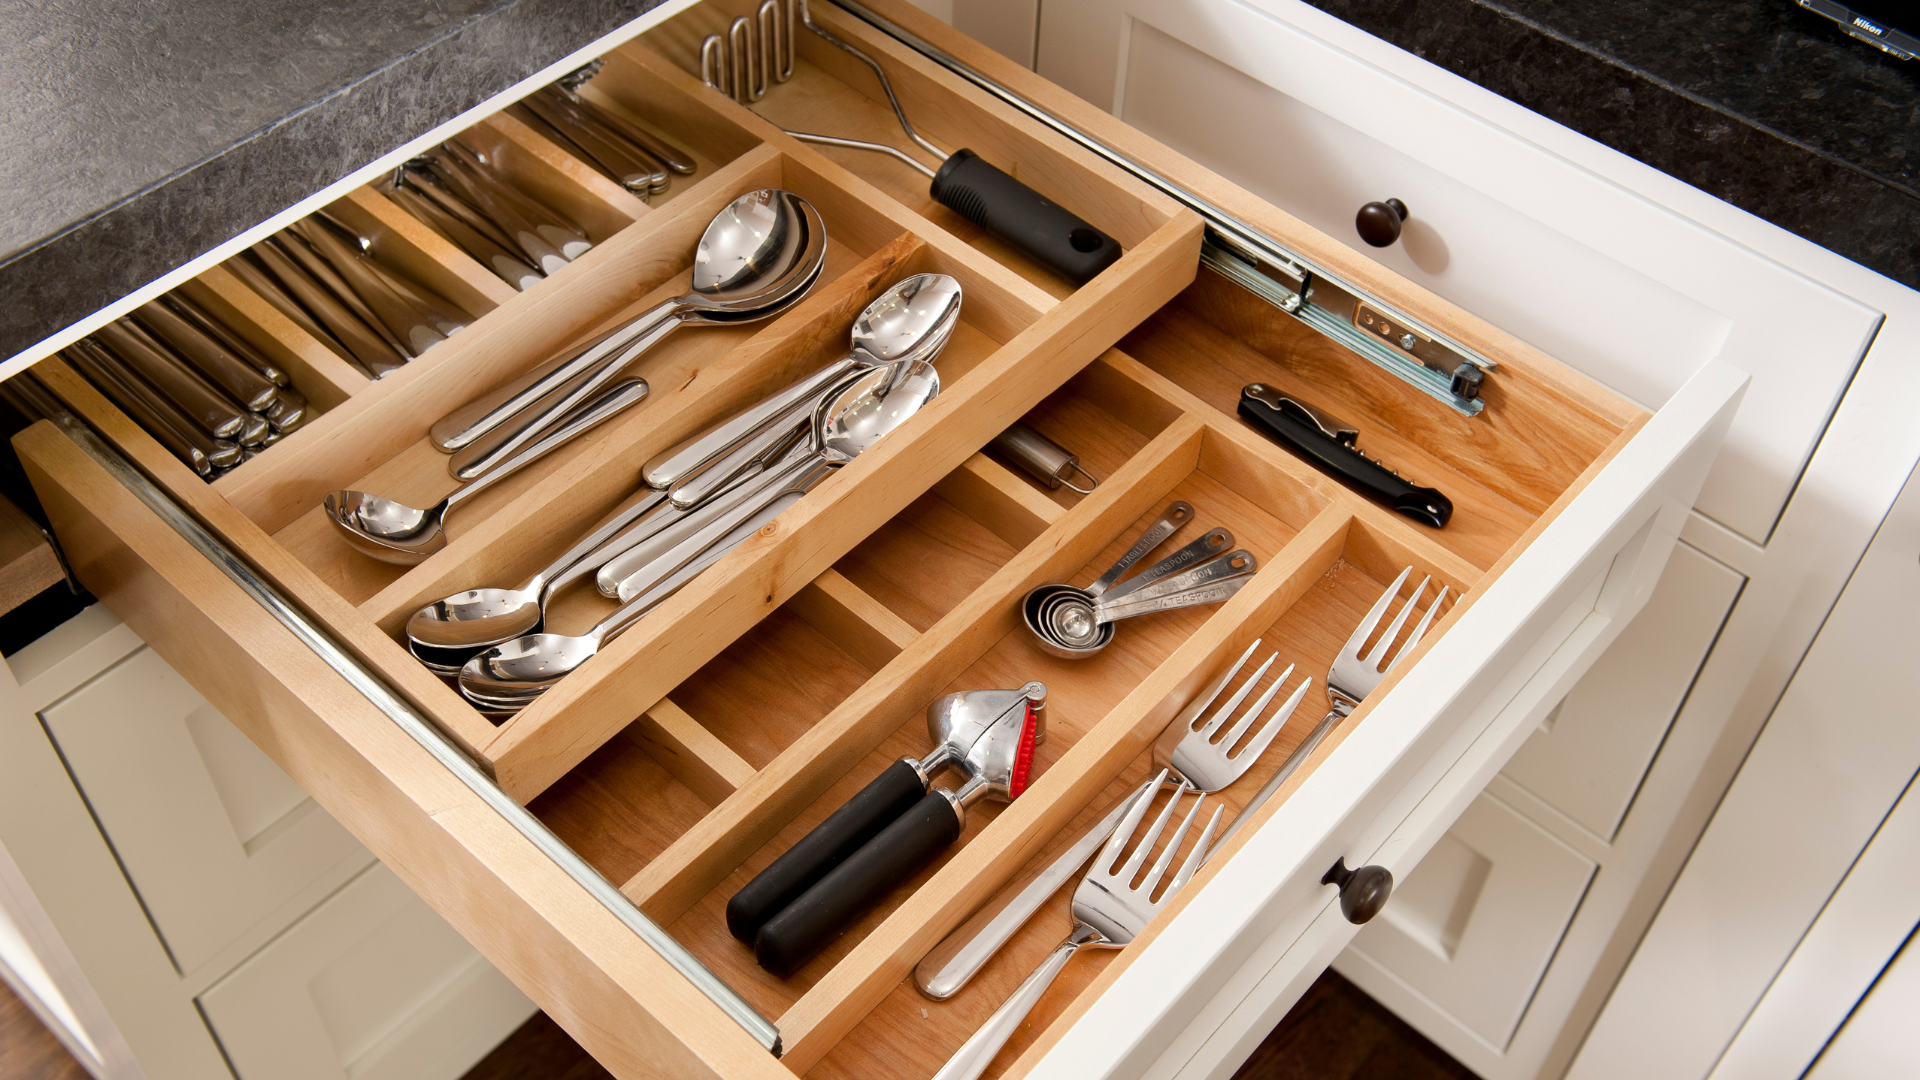 Silverware Drawer with Multiple Compartments for Organization